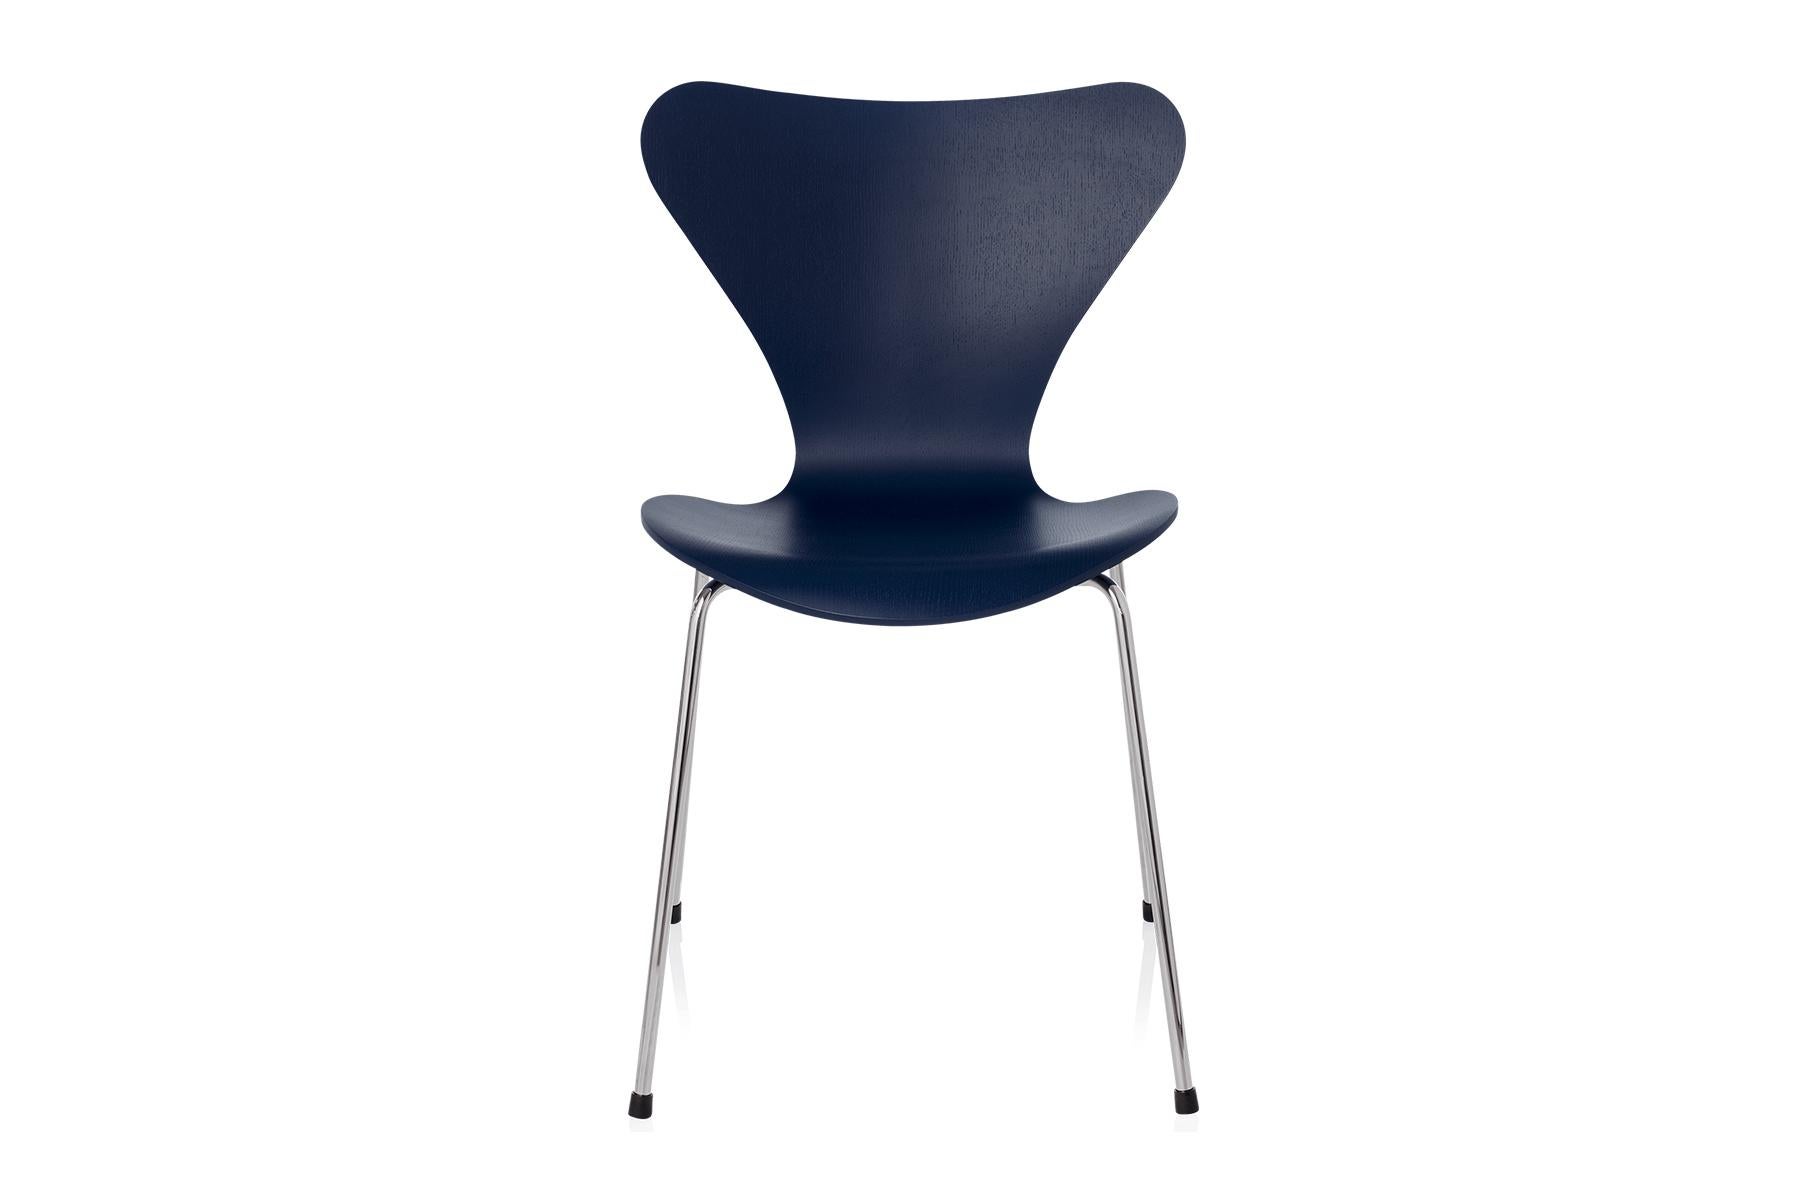 The Series 7™ designed by Arne Jacobsen is by far the most sold chair in the history of Fritz Hansen and perhaps also in furniture history. The pressure moulded veneer chair is a further development of the classic Ant™ chair. Series 7™ comes in